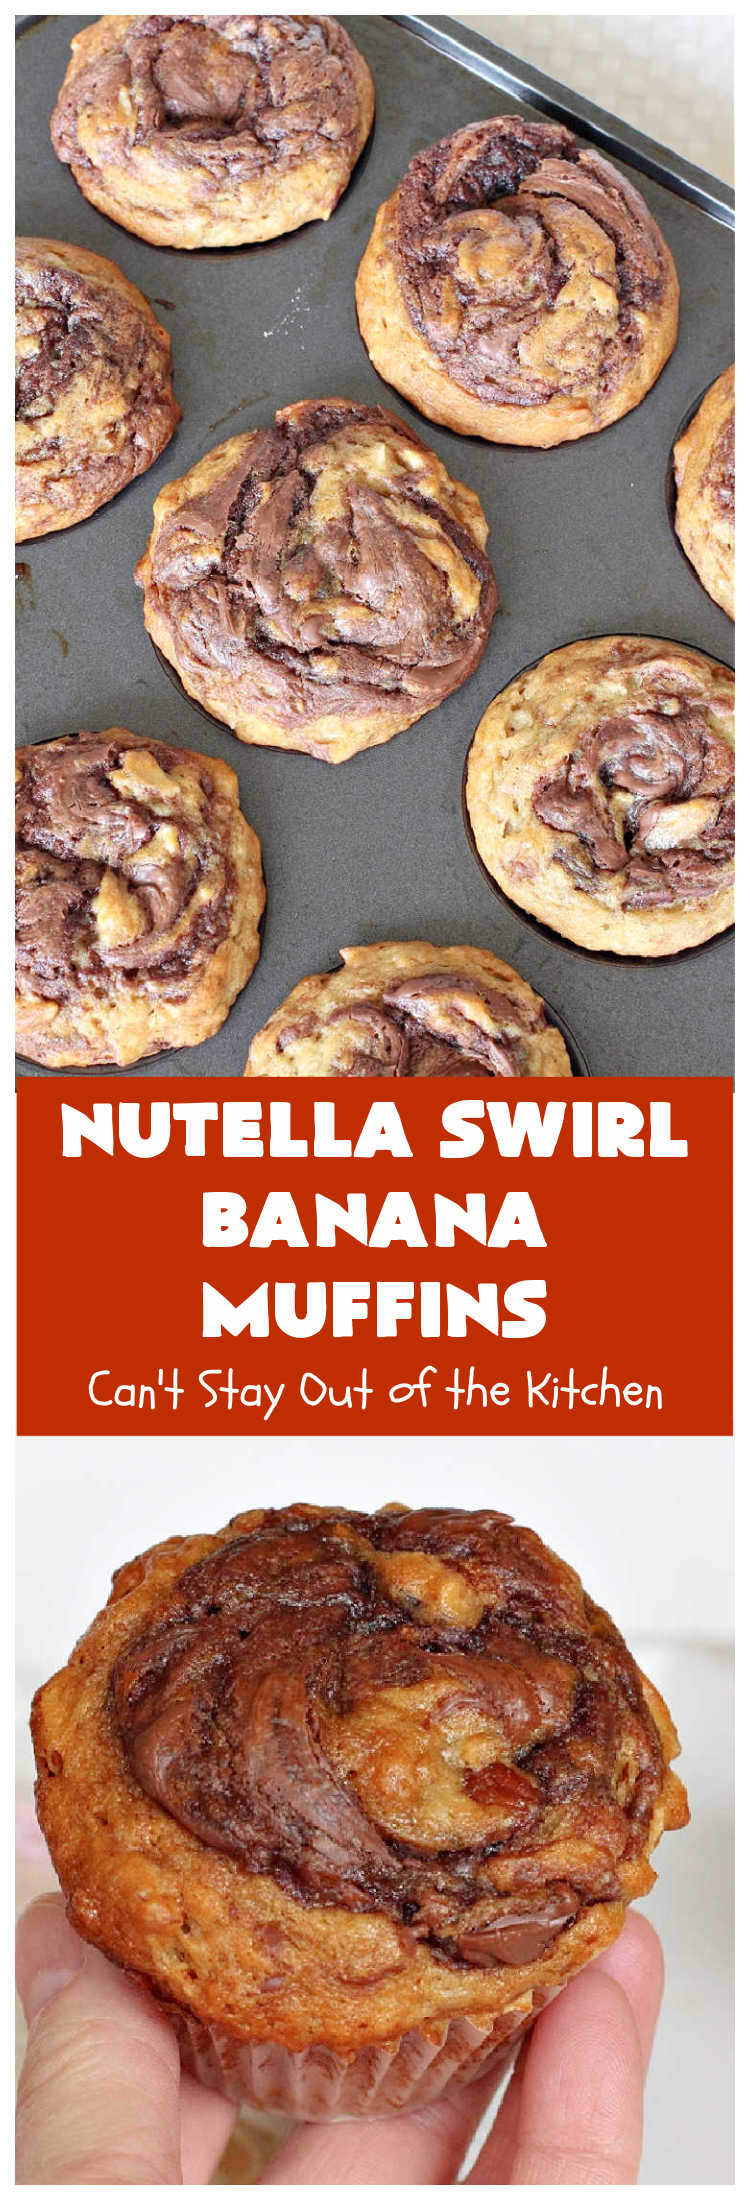 Nutella Swirl Banana Muffins | Can't Stay Out of the Kitchen | these outrageous #muffins are filled with #almonds & #bananas and swirled with #Nutella! These are so heavenly you won't be able to stay out of them. #breakfast #holiday #HolidayBreakfast #NutellaMuffins #NutellaSwirlBananaMuffins